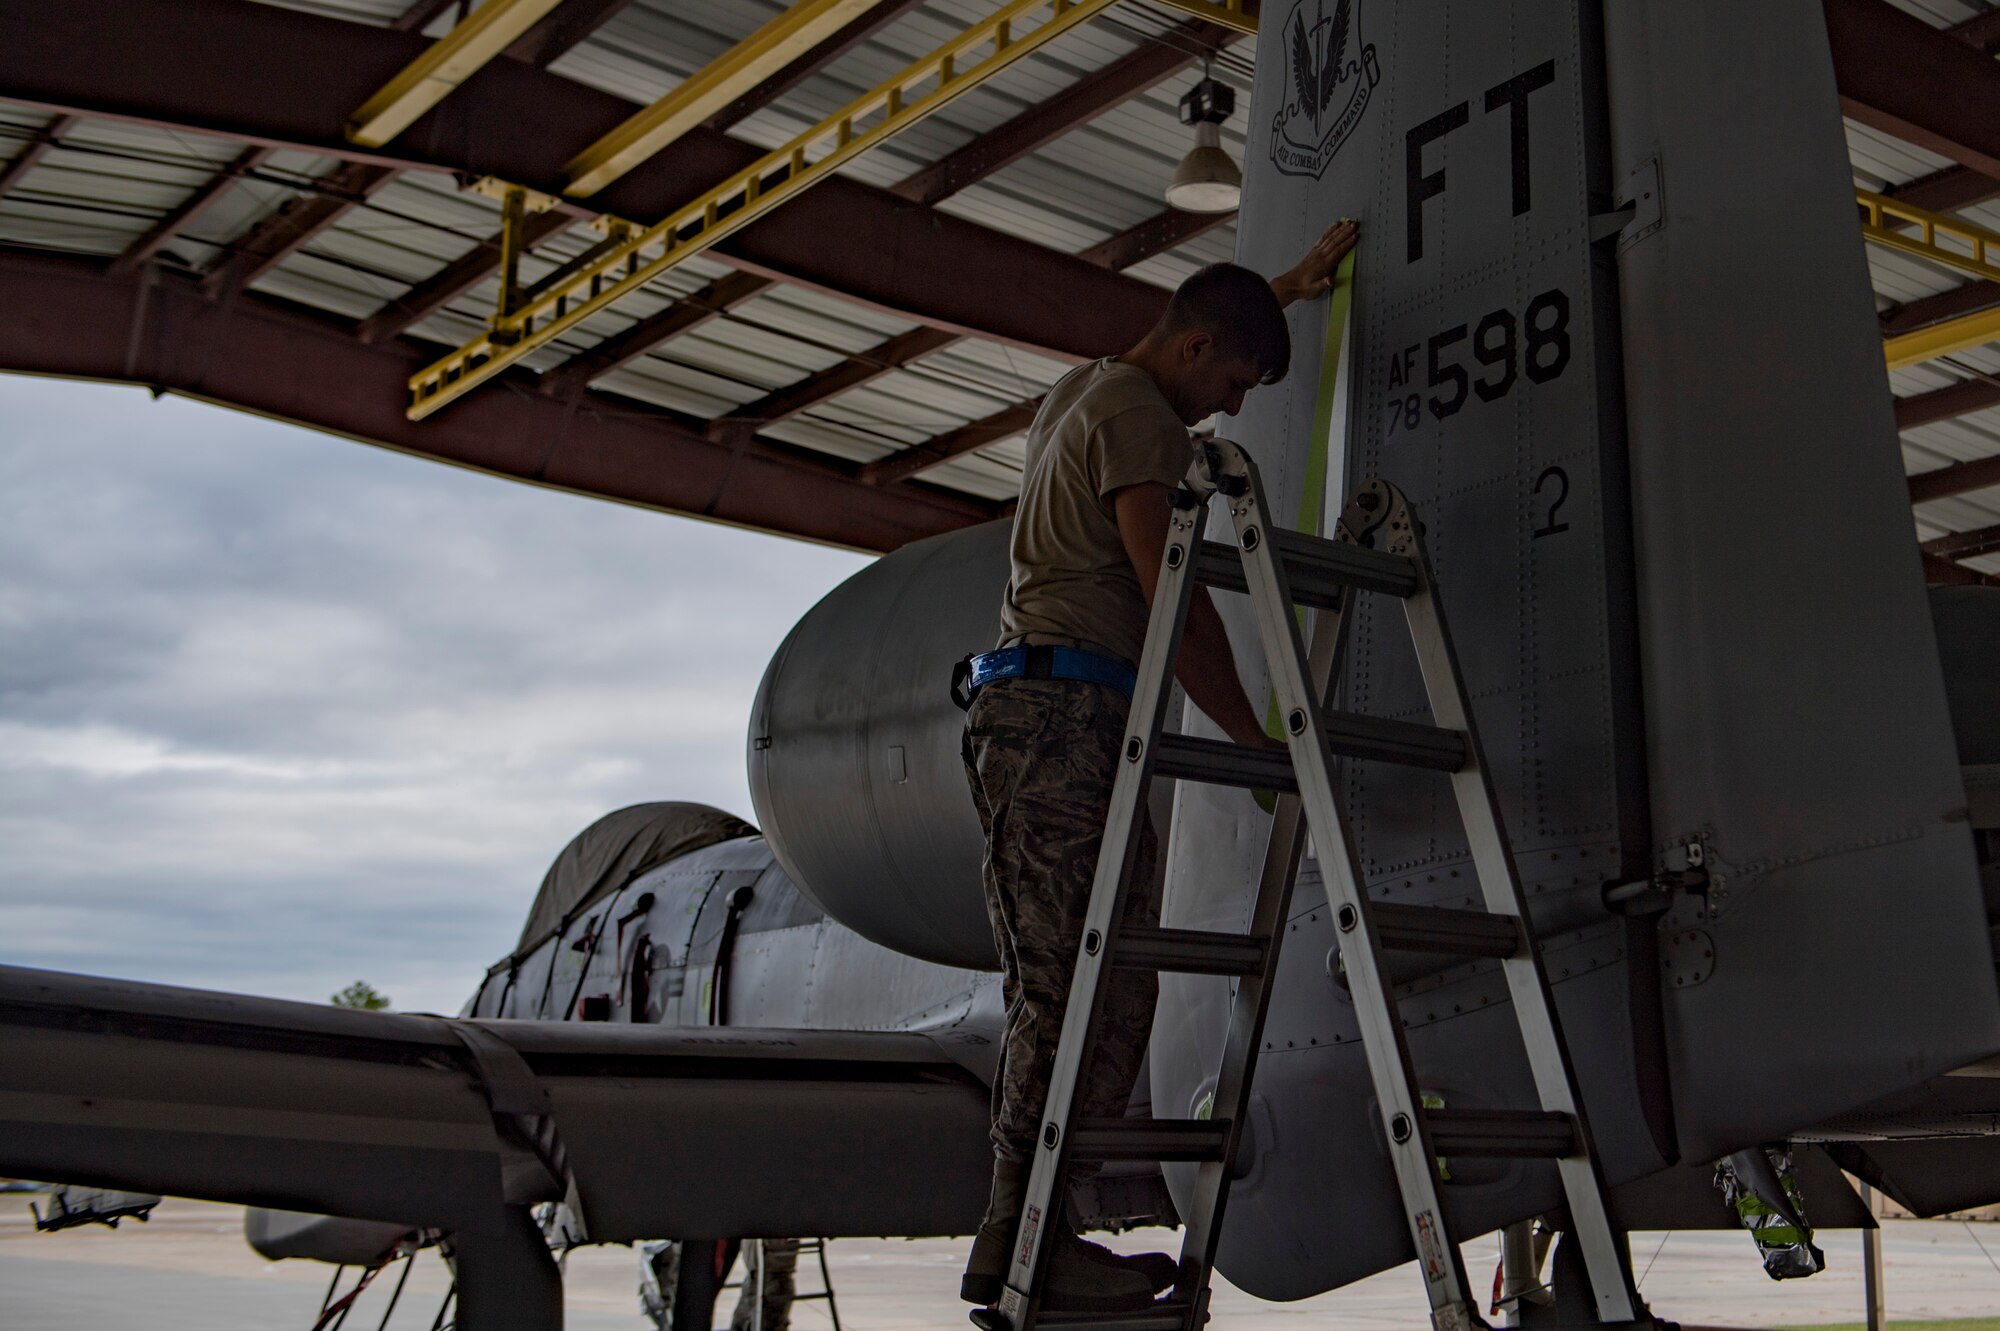 Airman 1st Class Jake Dromgold, 23d Aircraft Maintenance Squadron 74th Aircraft Maintenance Unit crew chief, prepares an A-10C Thunderbolt II to be washed, Aug. 28, 2017, at Moody Air Force Base, Ga. Maintenance procedures require that A-10s are washed at least every 180 days to prevent maintenance issues and safety hazards to the pilot. Since strong chemicals are used to clean the aircraft Airmen must wear personal protective equipment. (U.S. Air Force photo by Airman 1st Class Daniel Snider)